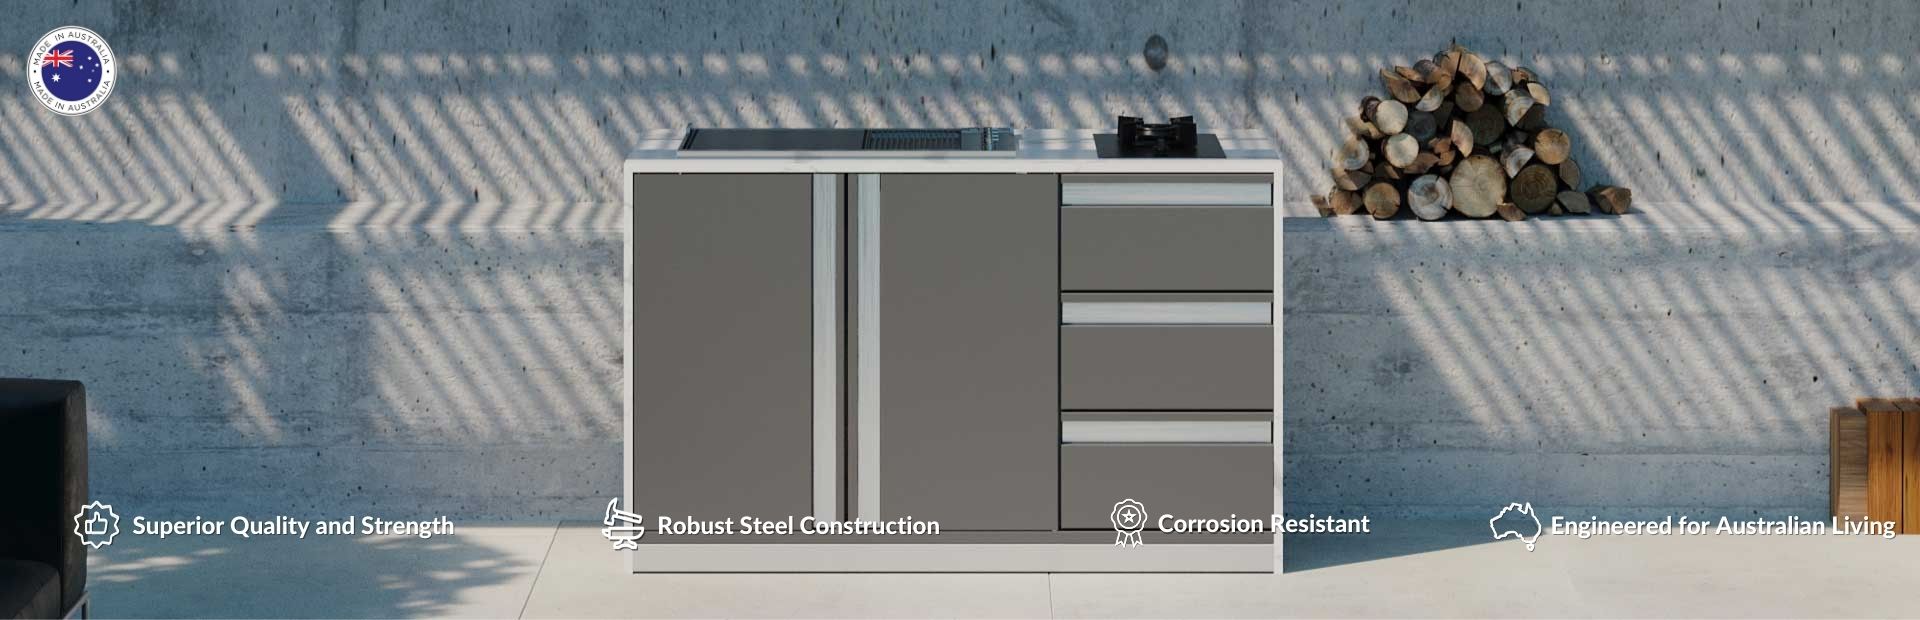 Compact outdoor kitchen with grey double door cabinet, three draws, gas linea BBQ and side burner in an alfresco area.